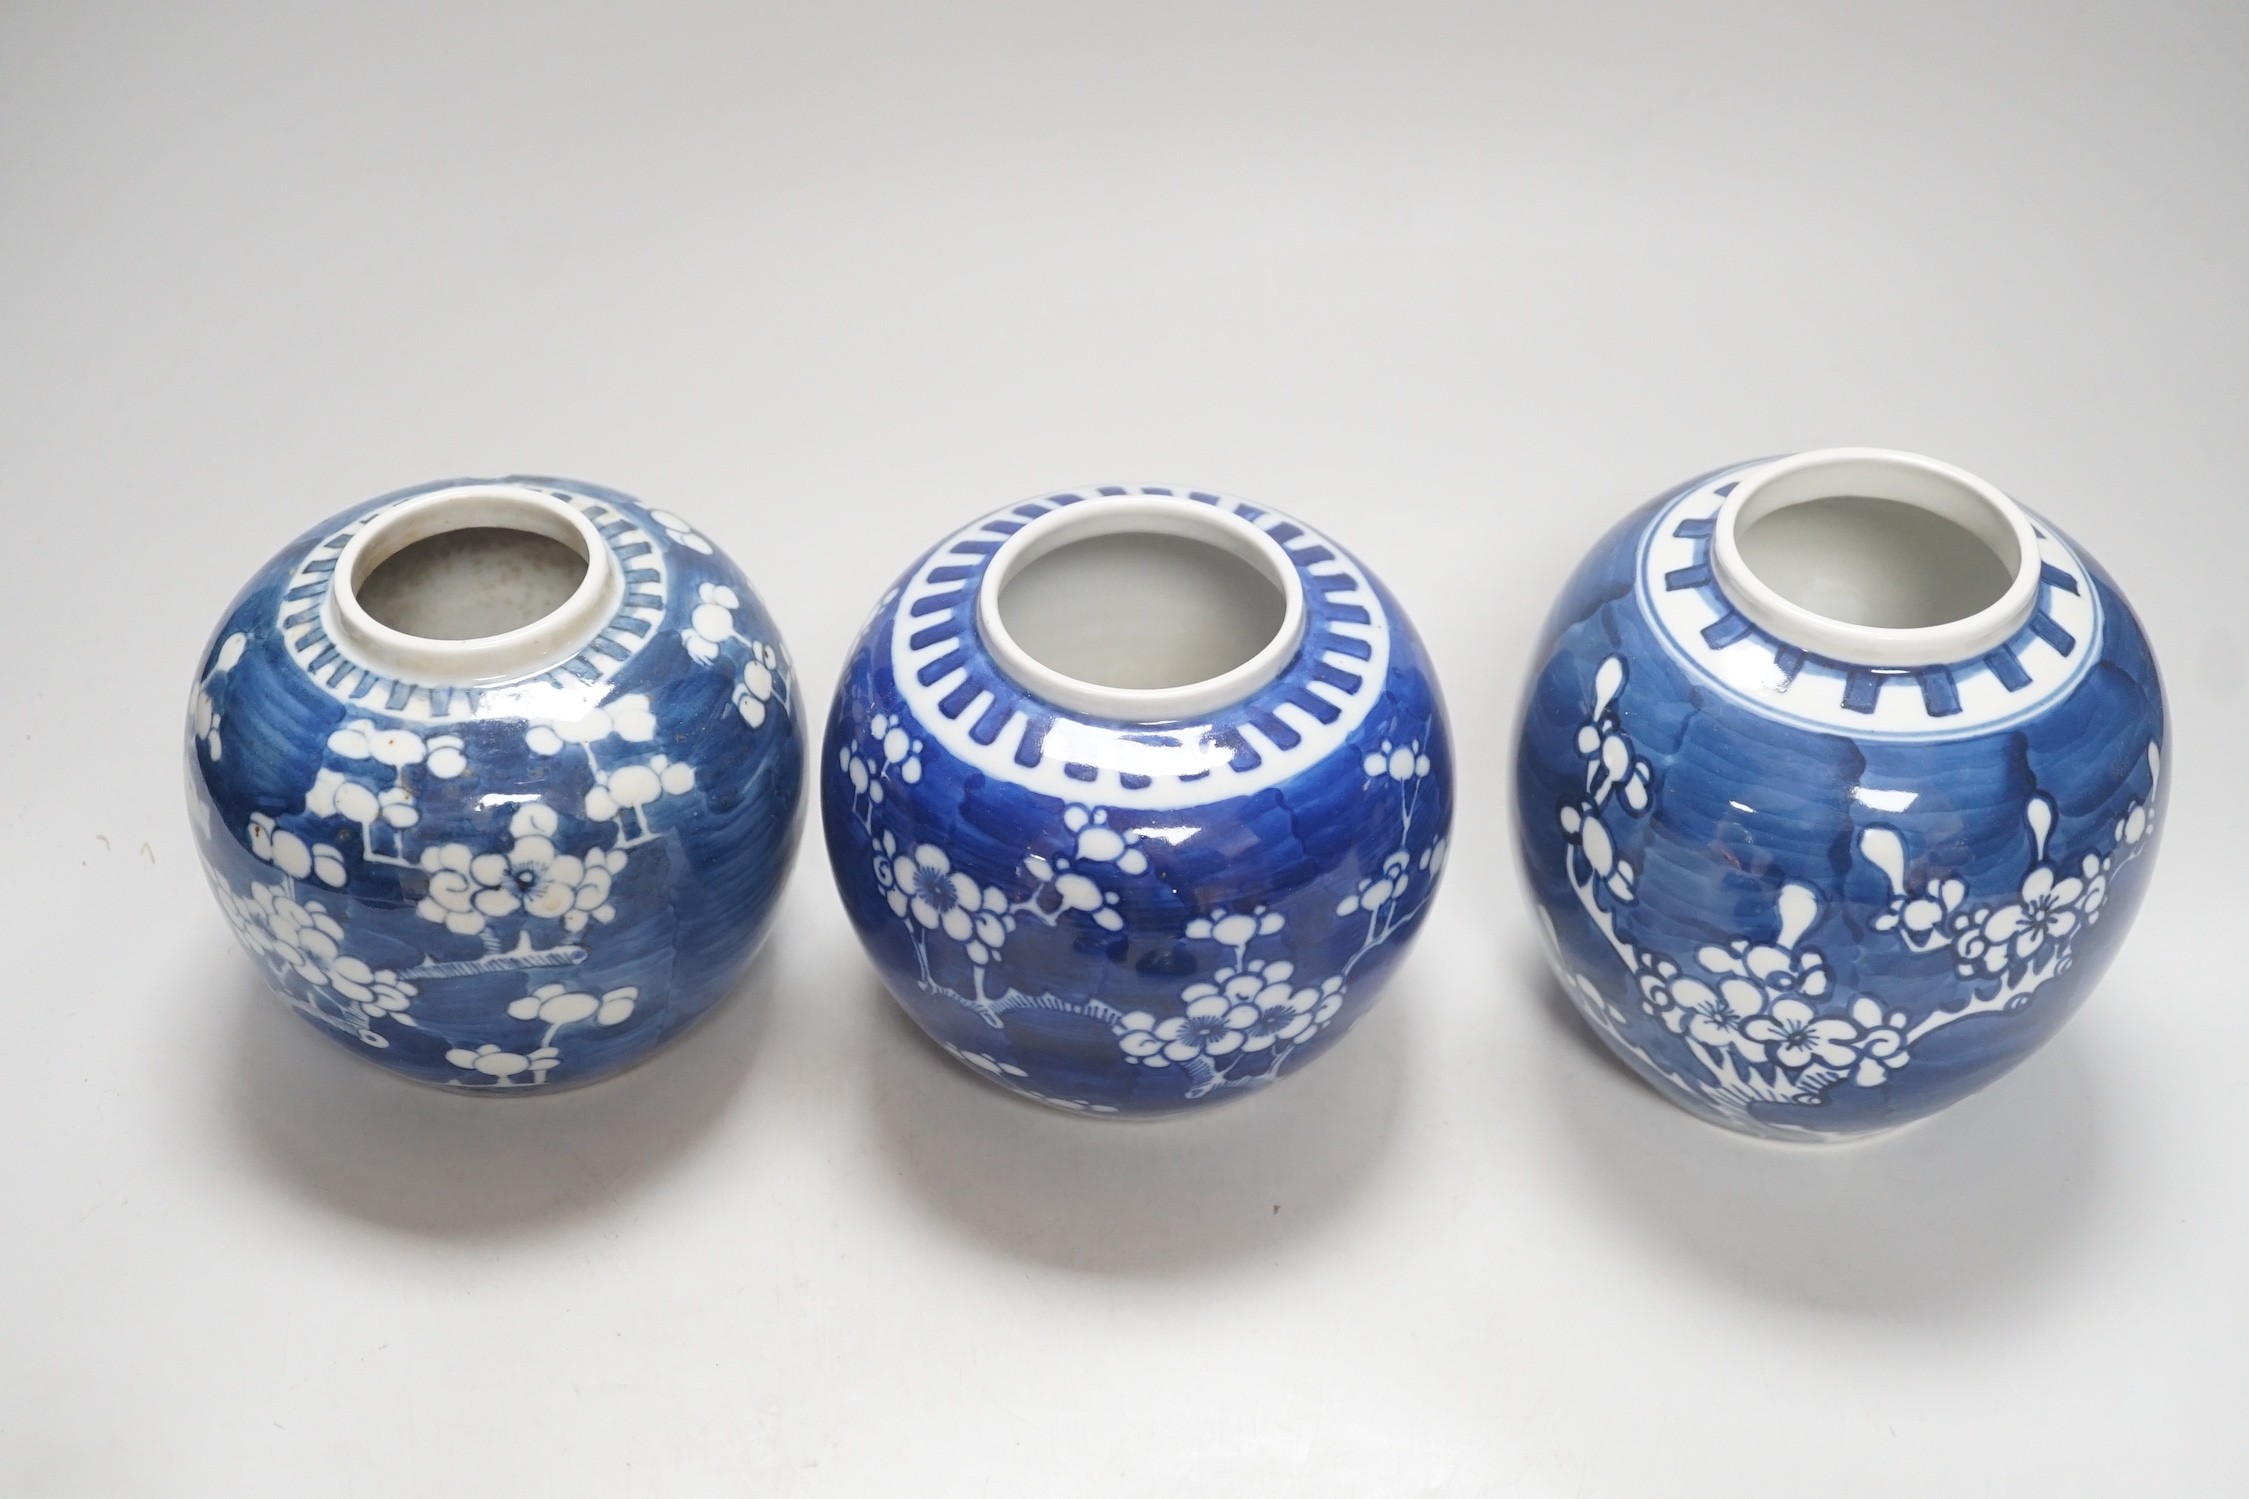 Three Chinese blue and white prunus jars, late 19th / early 20th century, tallest 16cm